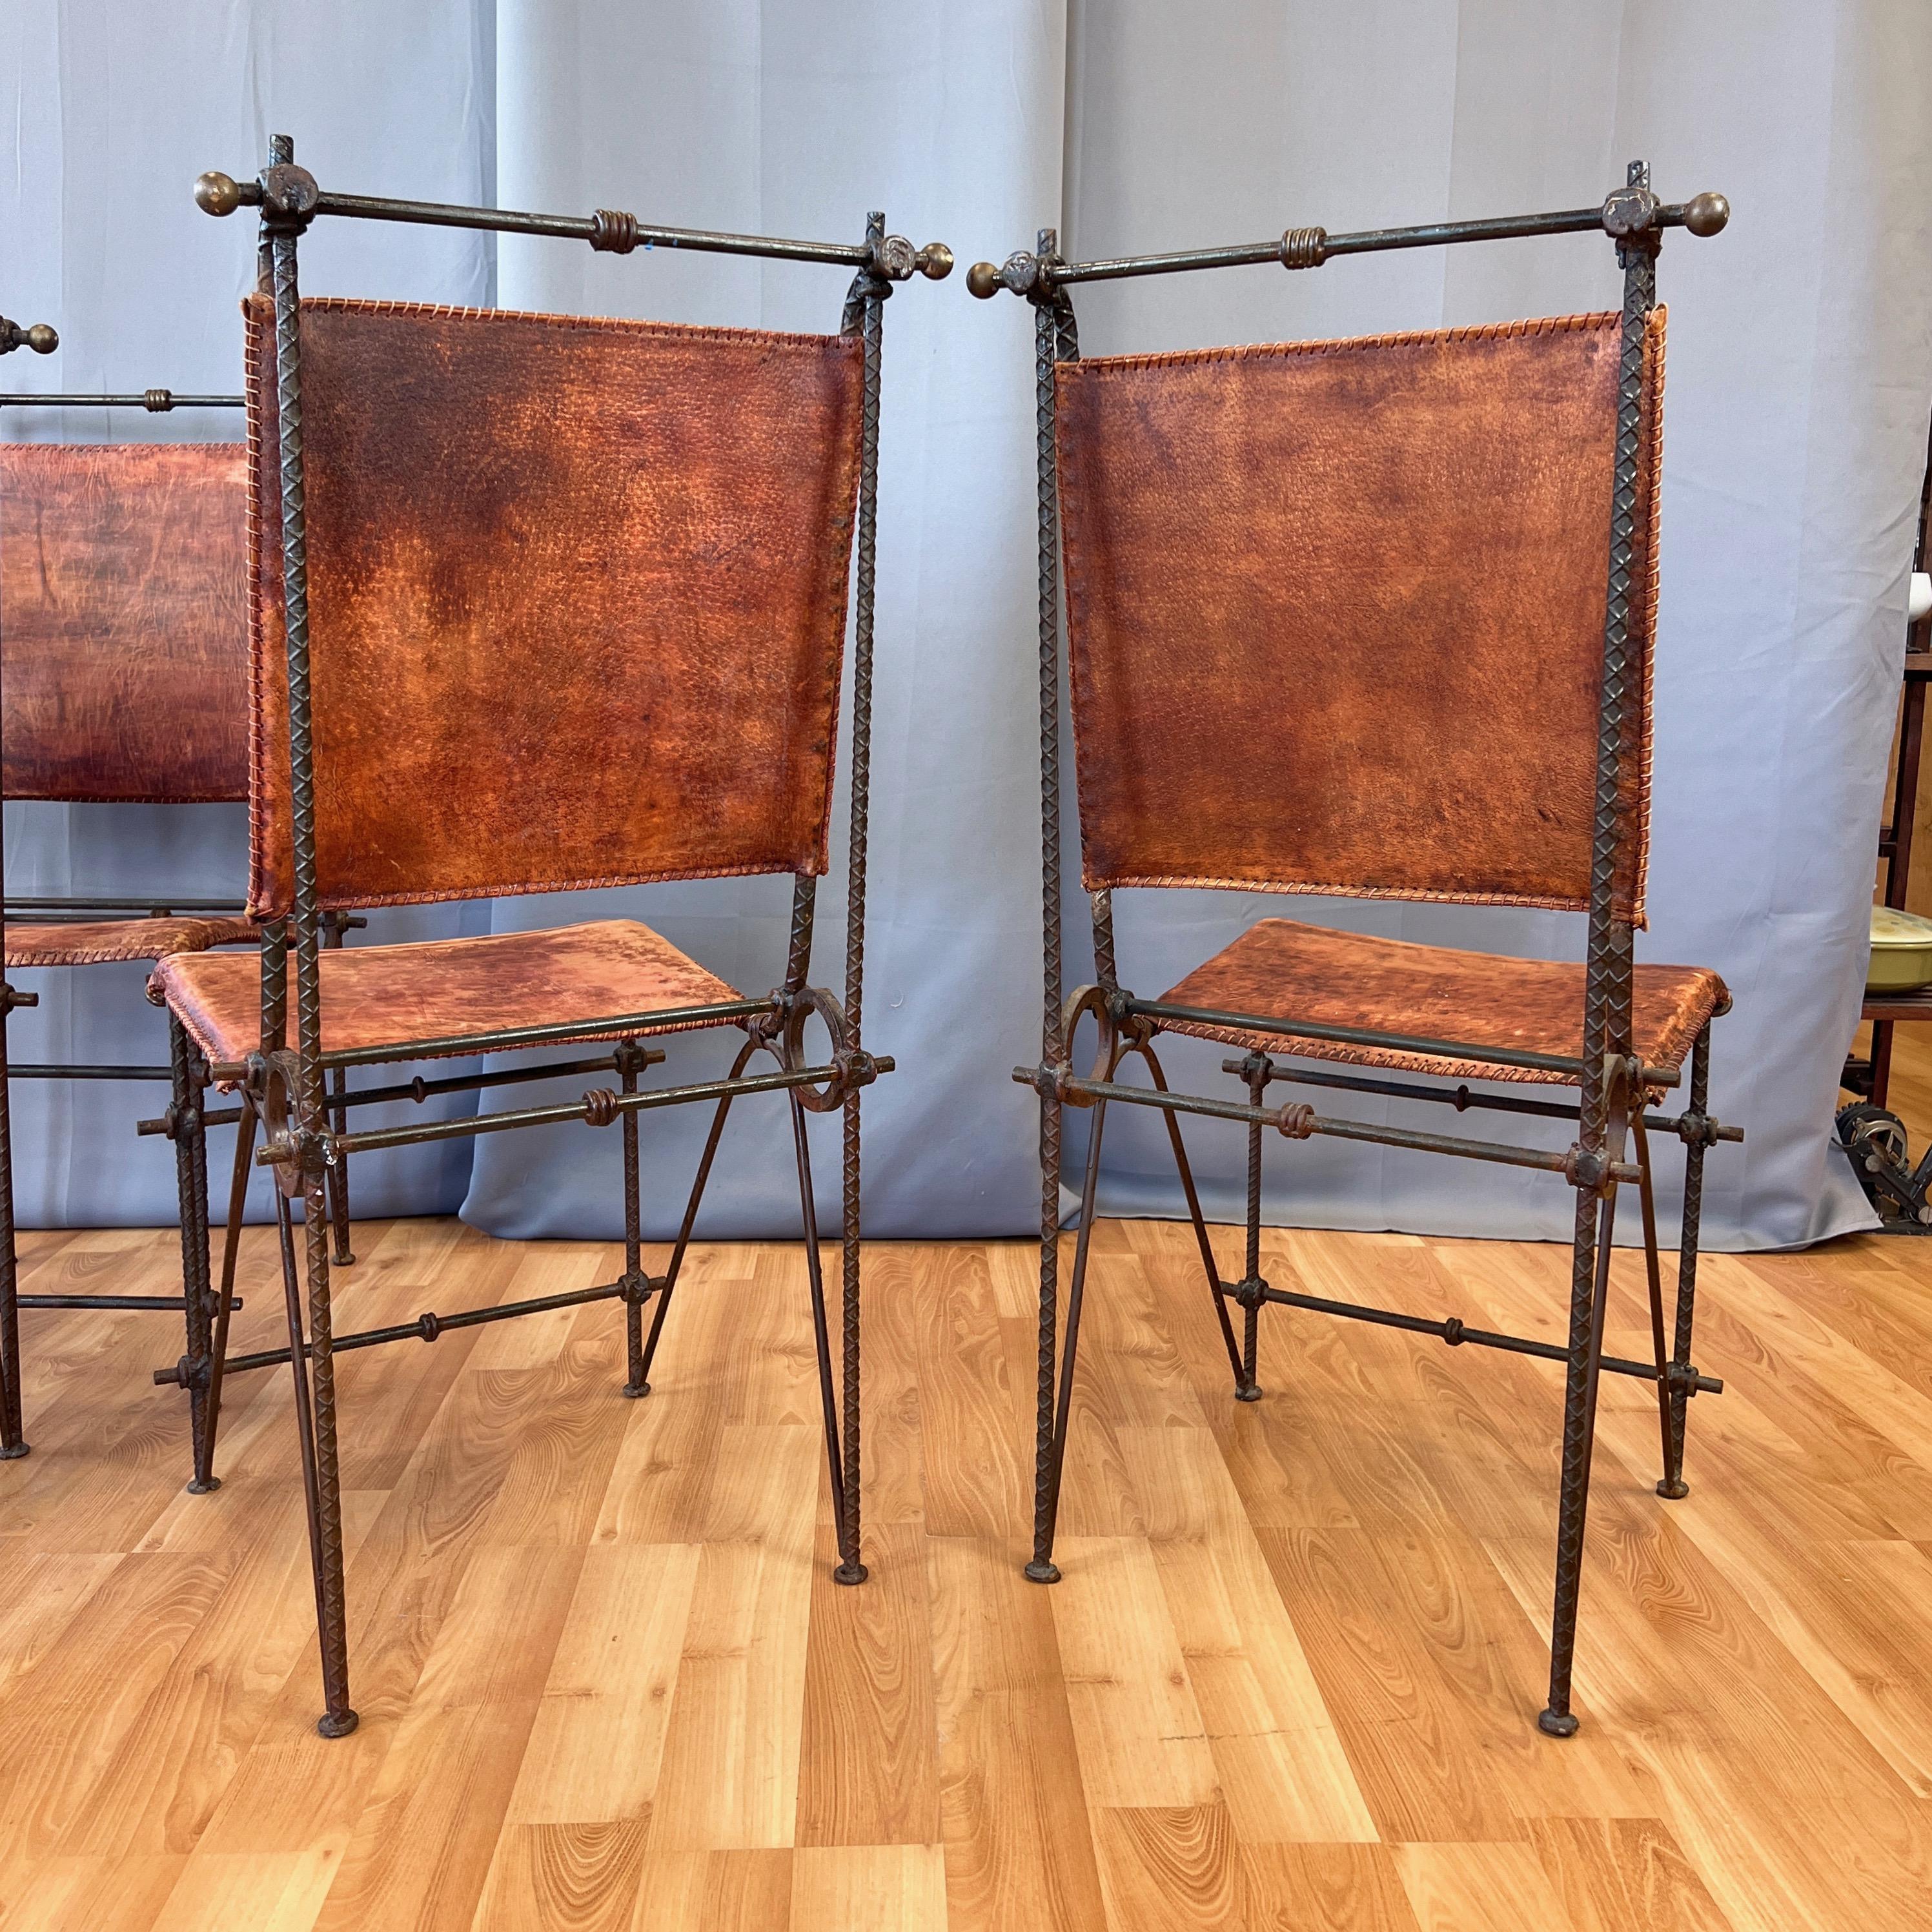 Set of 4 Ilana Goor-Attributed Brutalist Metal and Leather Dining Chairs, 1980 For Sale 3